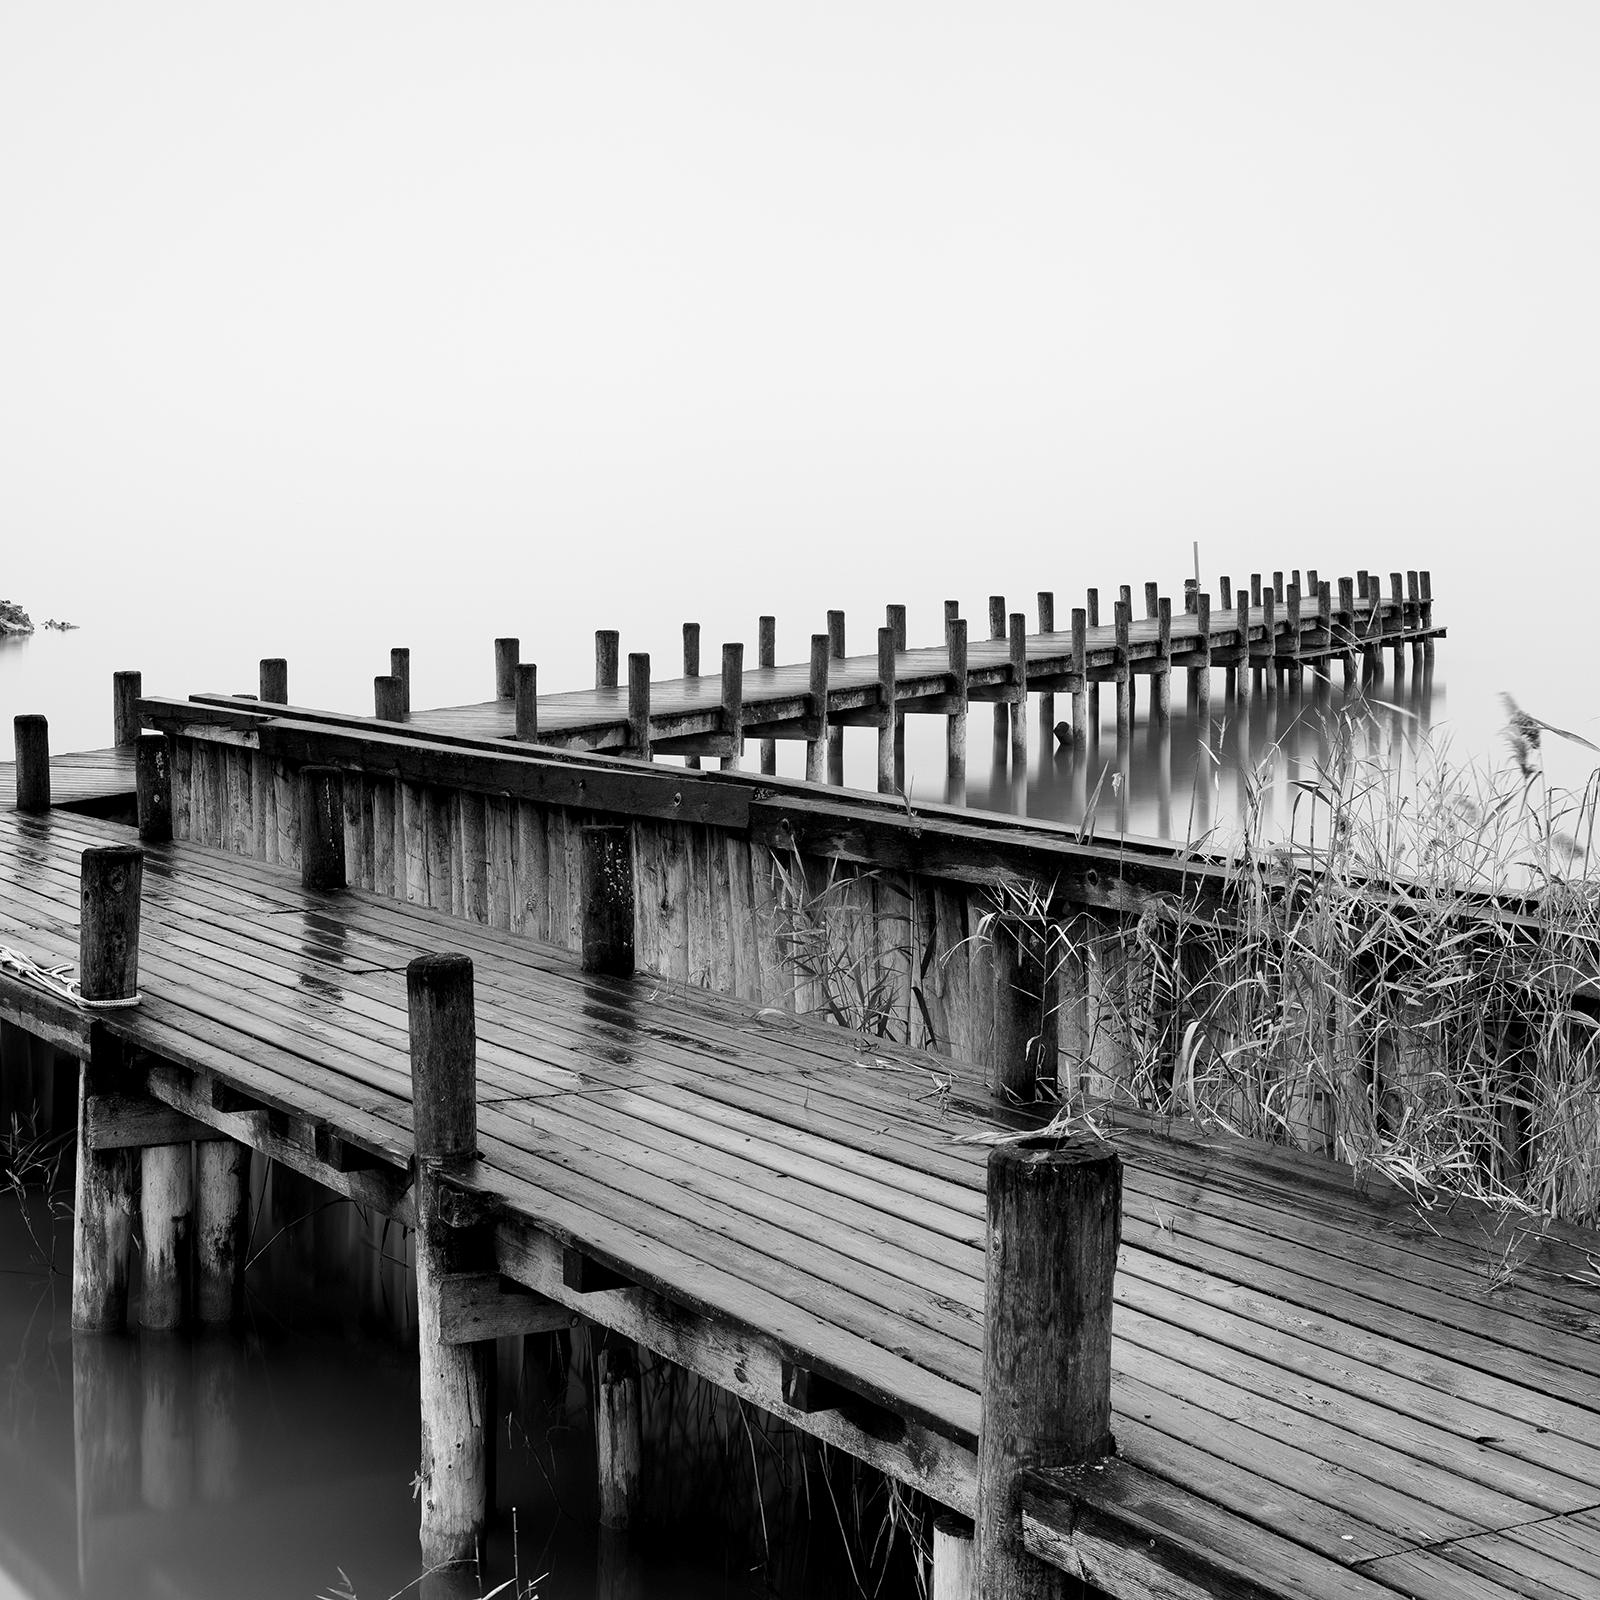 Jetty on calm Lake, foggy morning, black and white, long exposure art waterscape For Sale 4